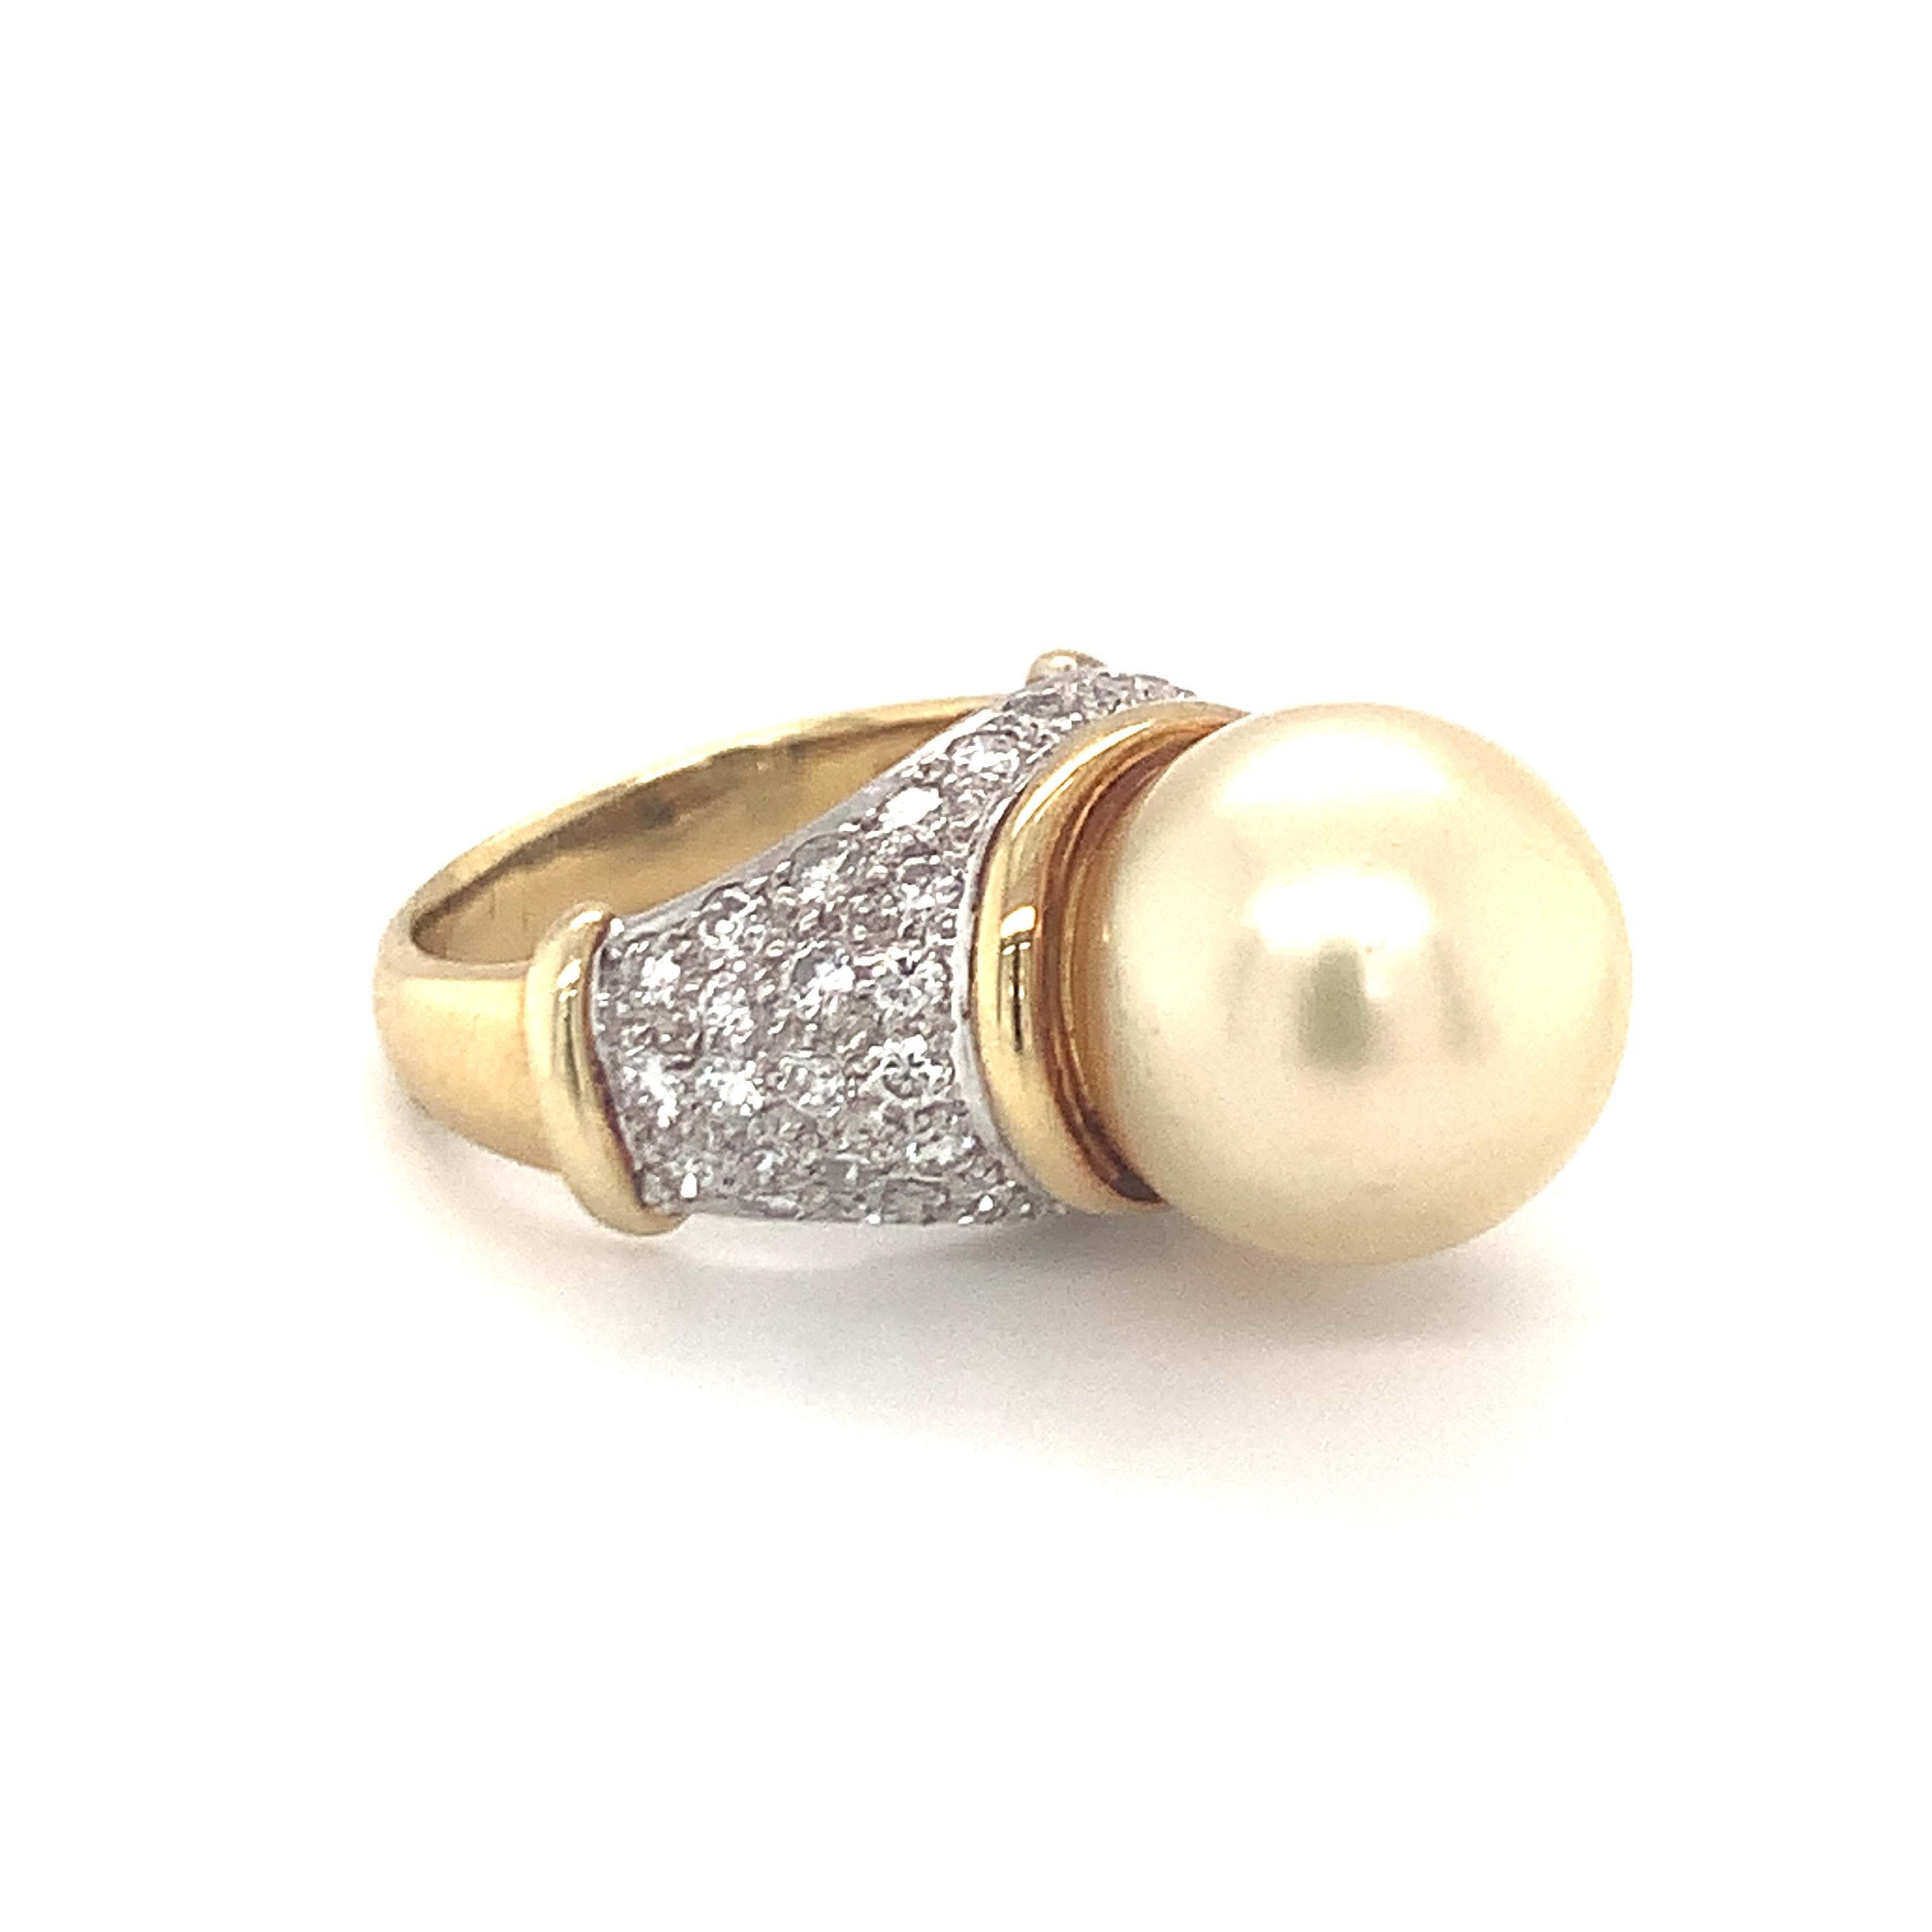 Pearl and diamond 18K yellow gold ring featuring one round golden South Sea pearl measuring 13 millimeters in diameter. Further enhanced by fifty round brilliant cut diamonds totaling 1.50 ct. with G color and VS-1 clarity. Part of matching set with